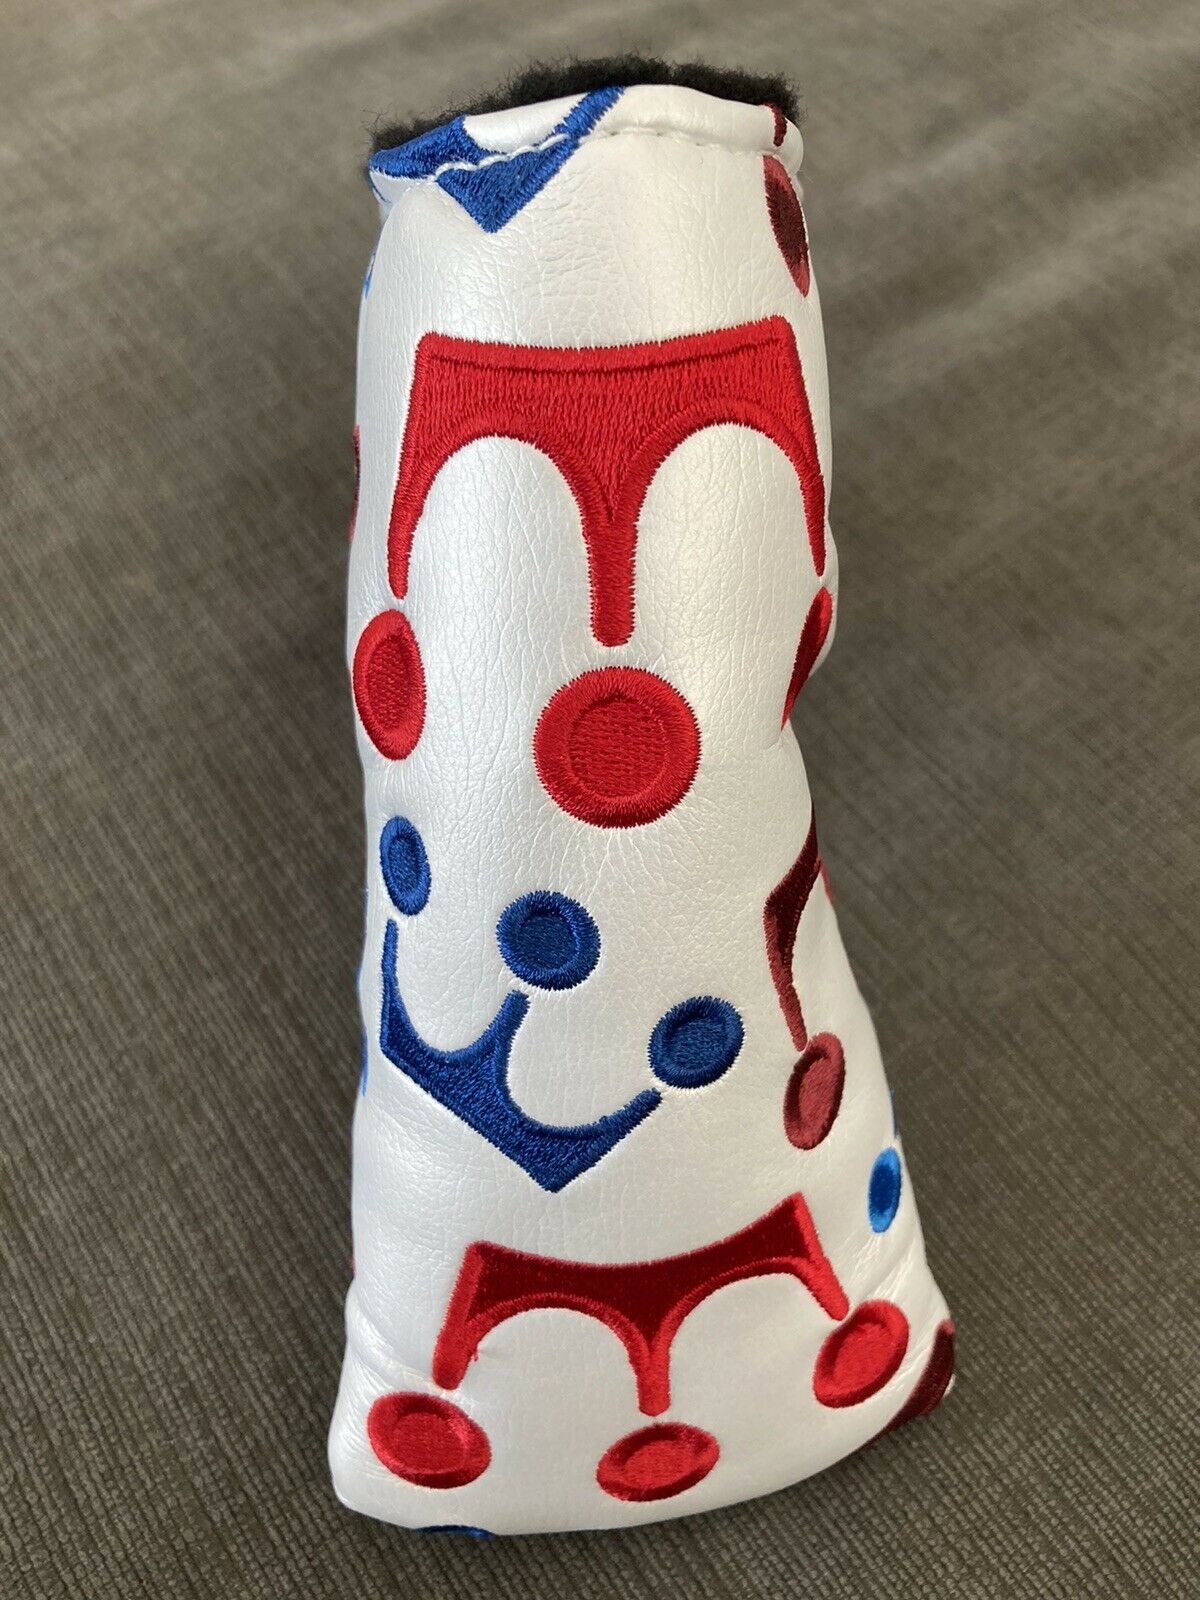 RARE Scotty Cameron CROWNS Mini USA GALLERY ONLY Dancing Putter Blade ...